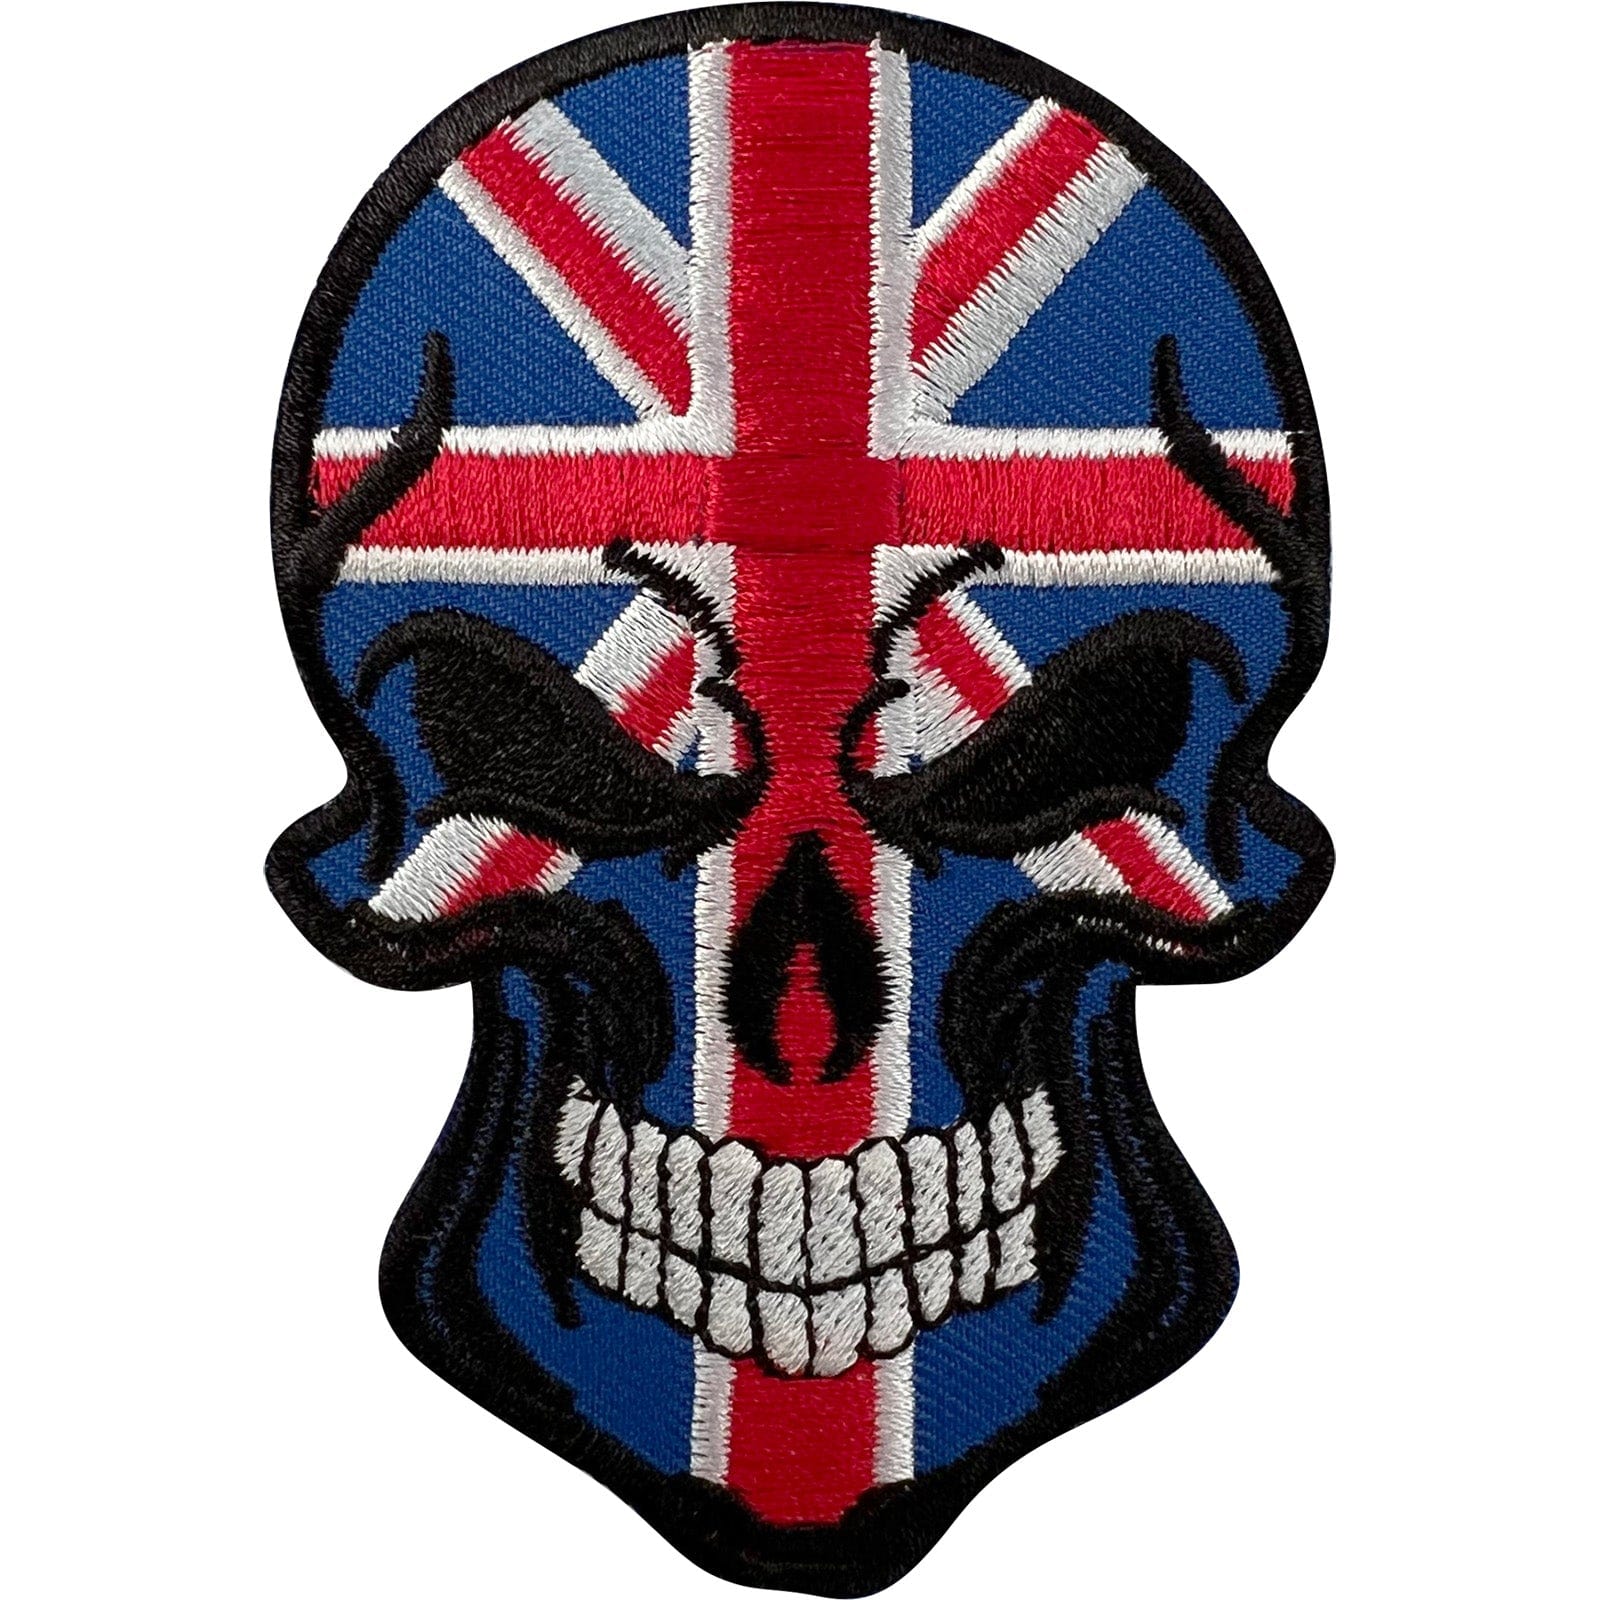 Union Jack Flag Skull Patch Iron Sew On Clothes T Shirt Bag UK Embroidered Badge